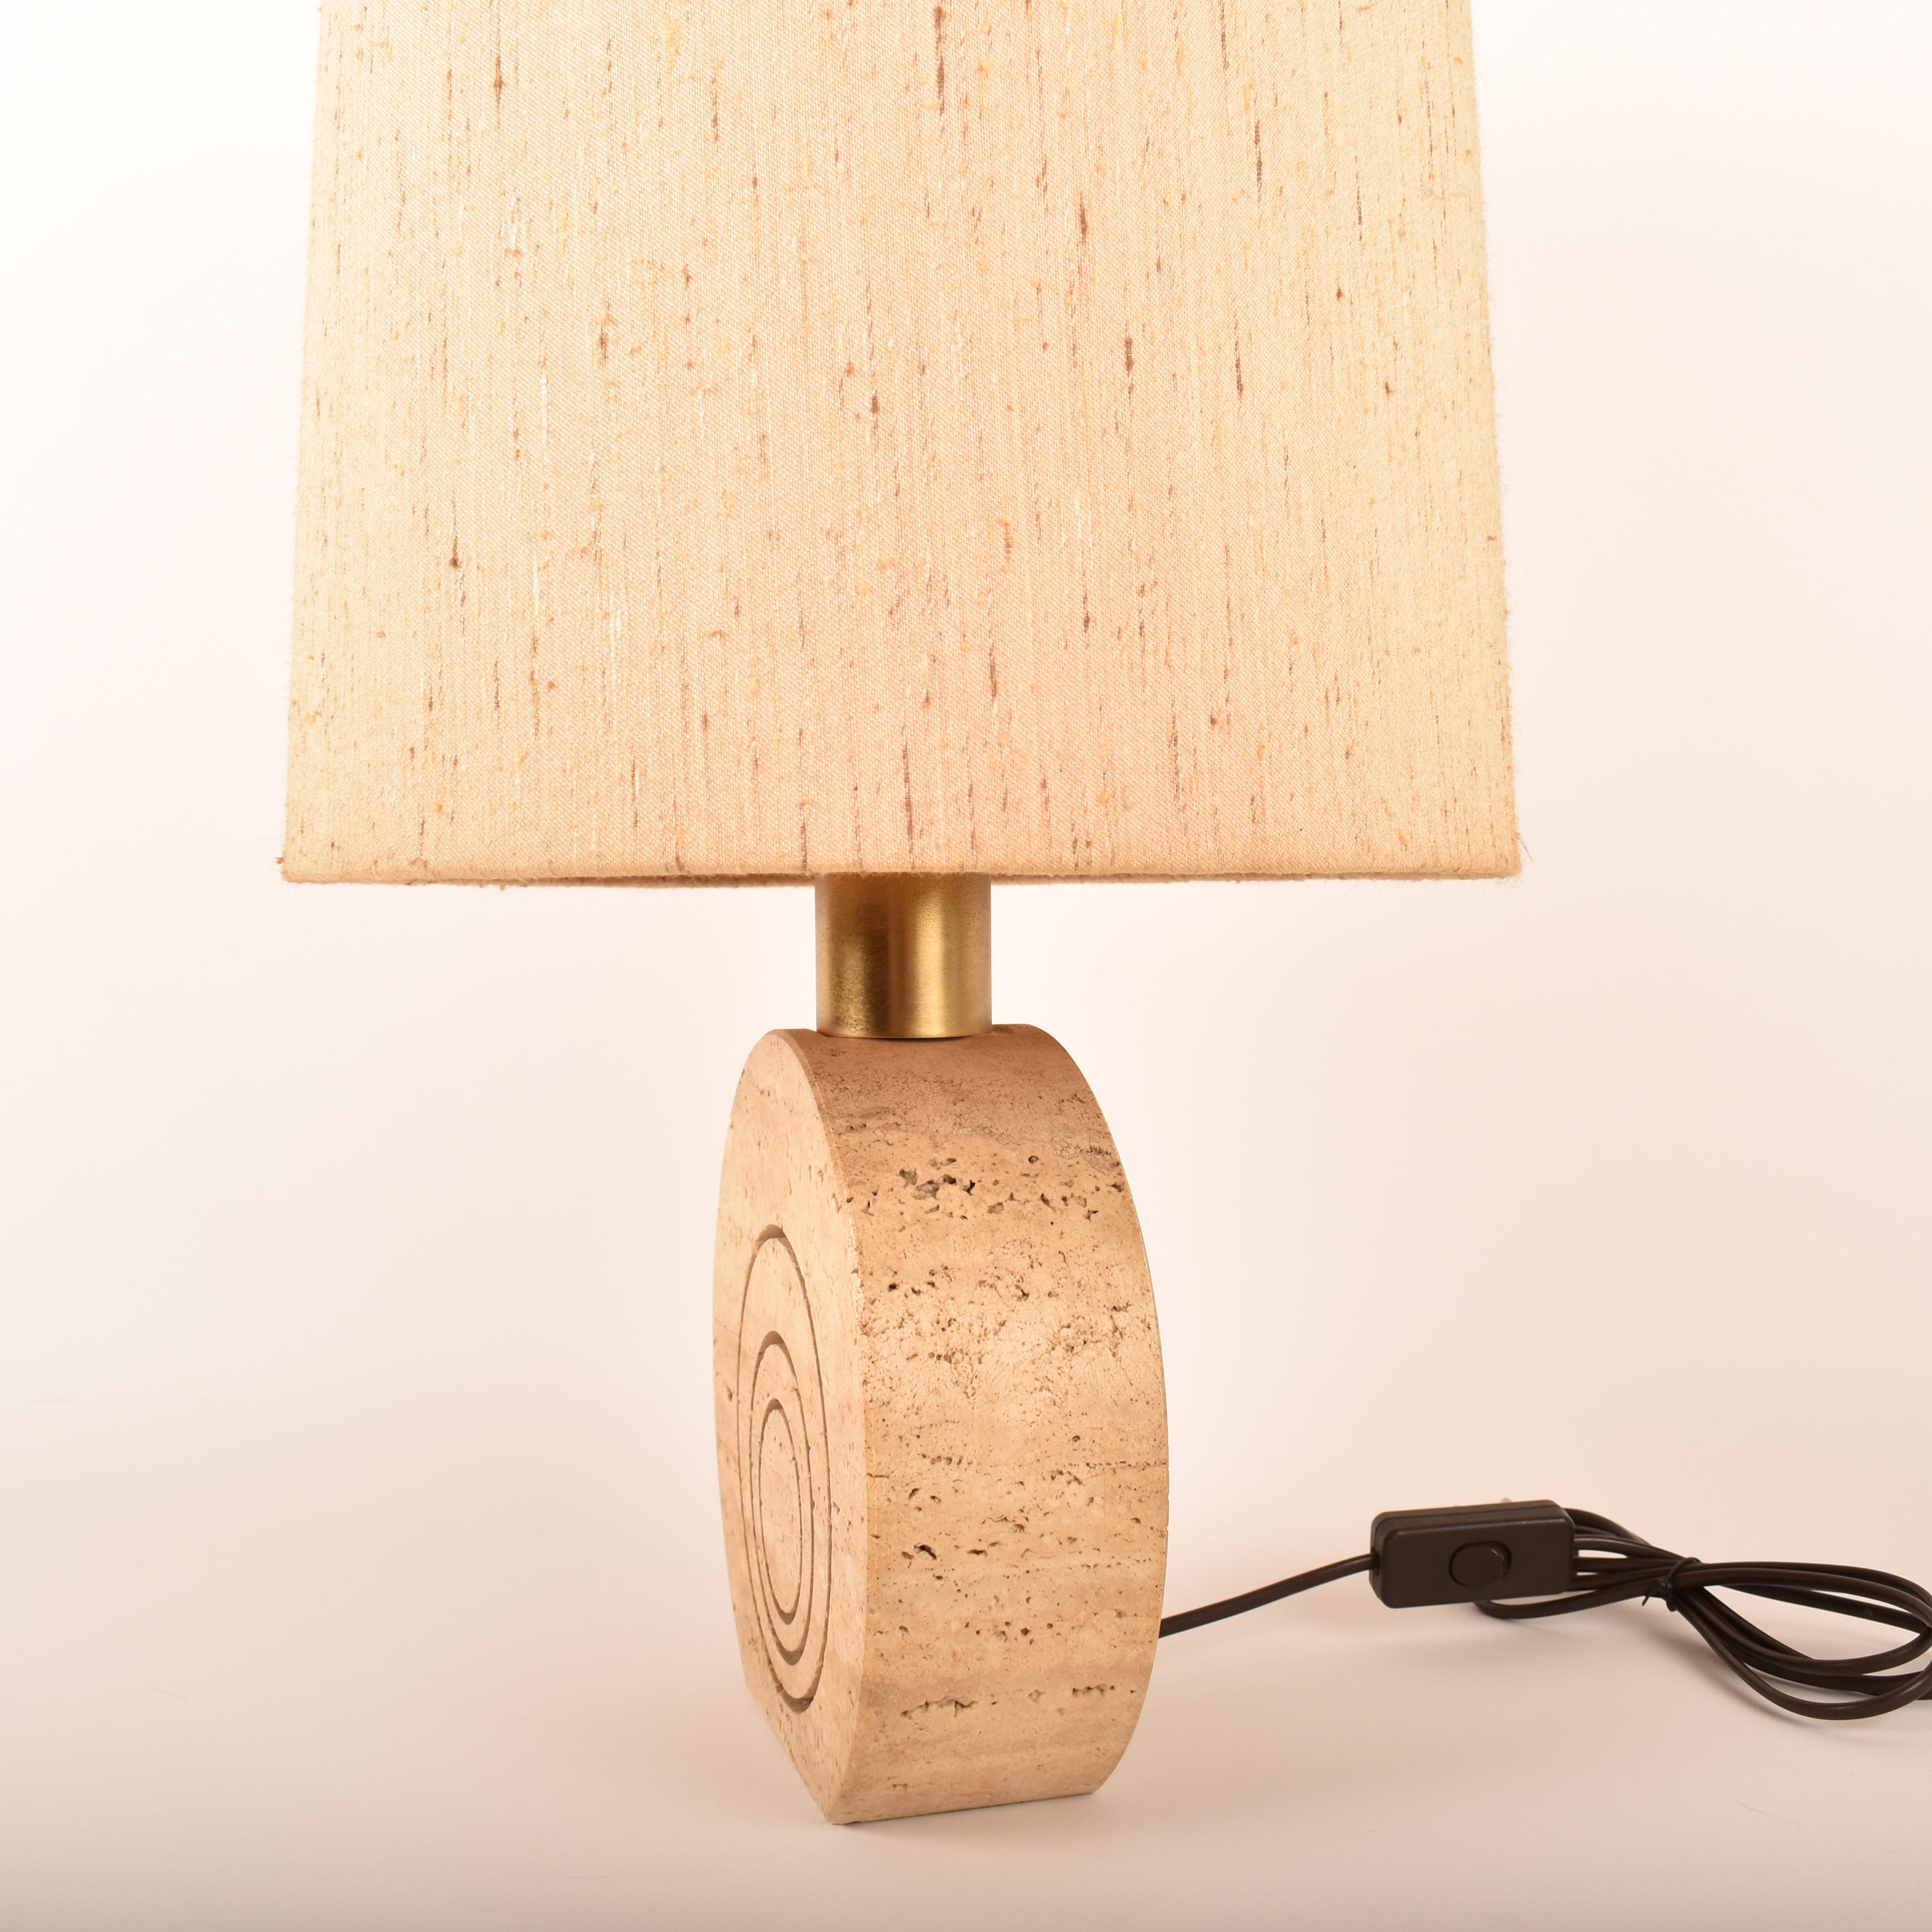 Iconic table lamp, designed and made by the Fratelli Manelli in Italy around 1970.
The lamp is made of travertine, with concentric circles engravements, in a cream colour. 
The shade is in very good condition, still original, and gives a nice soft